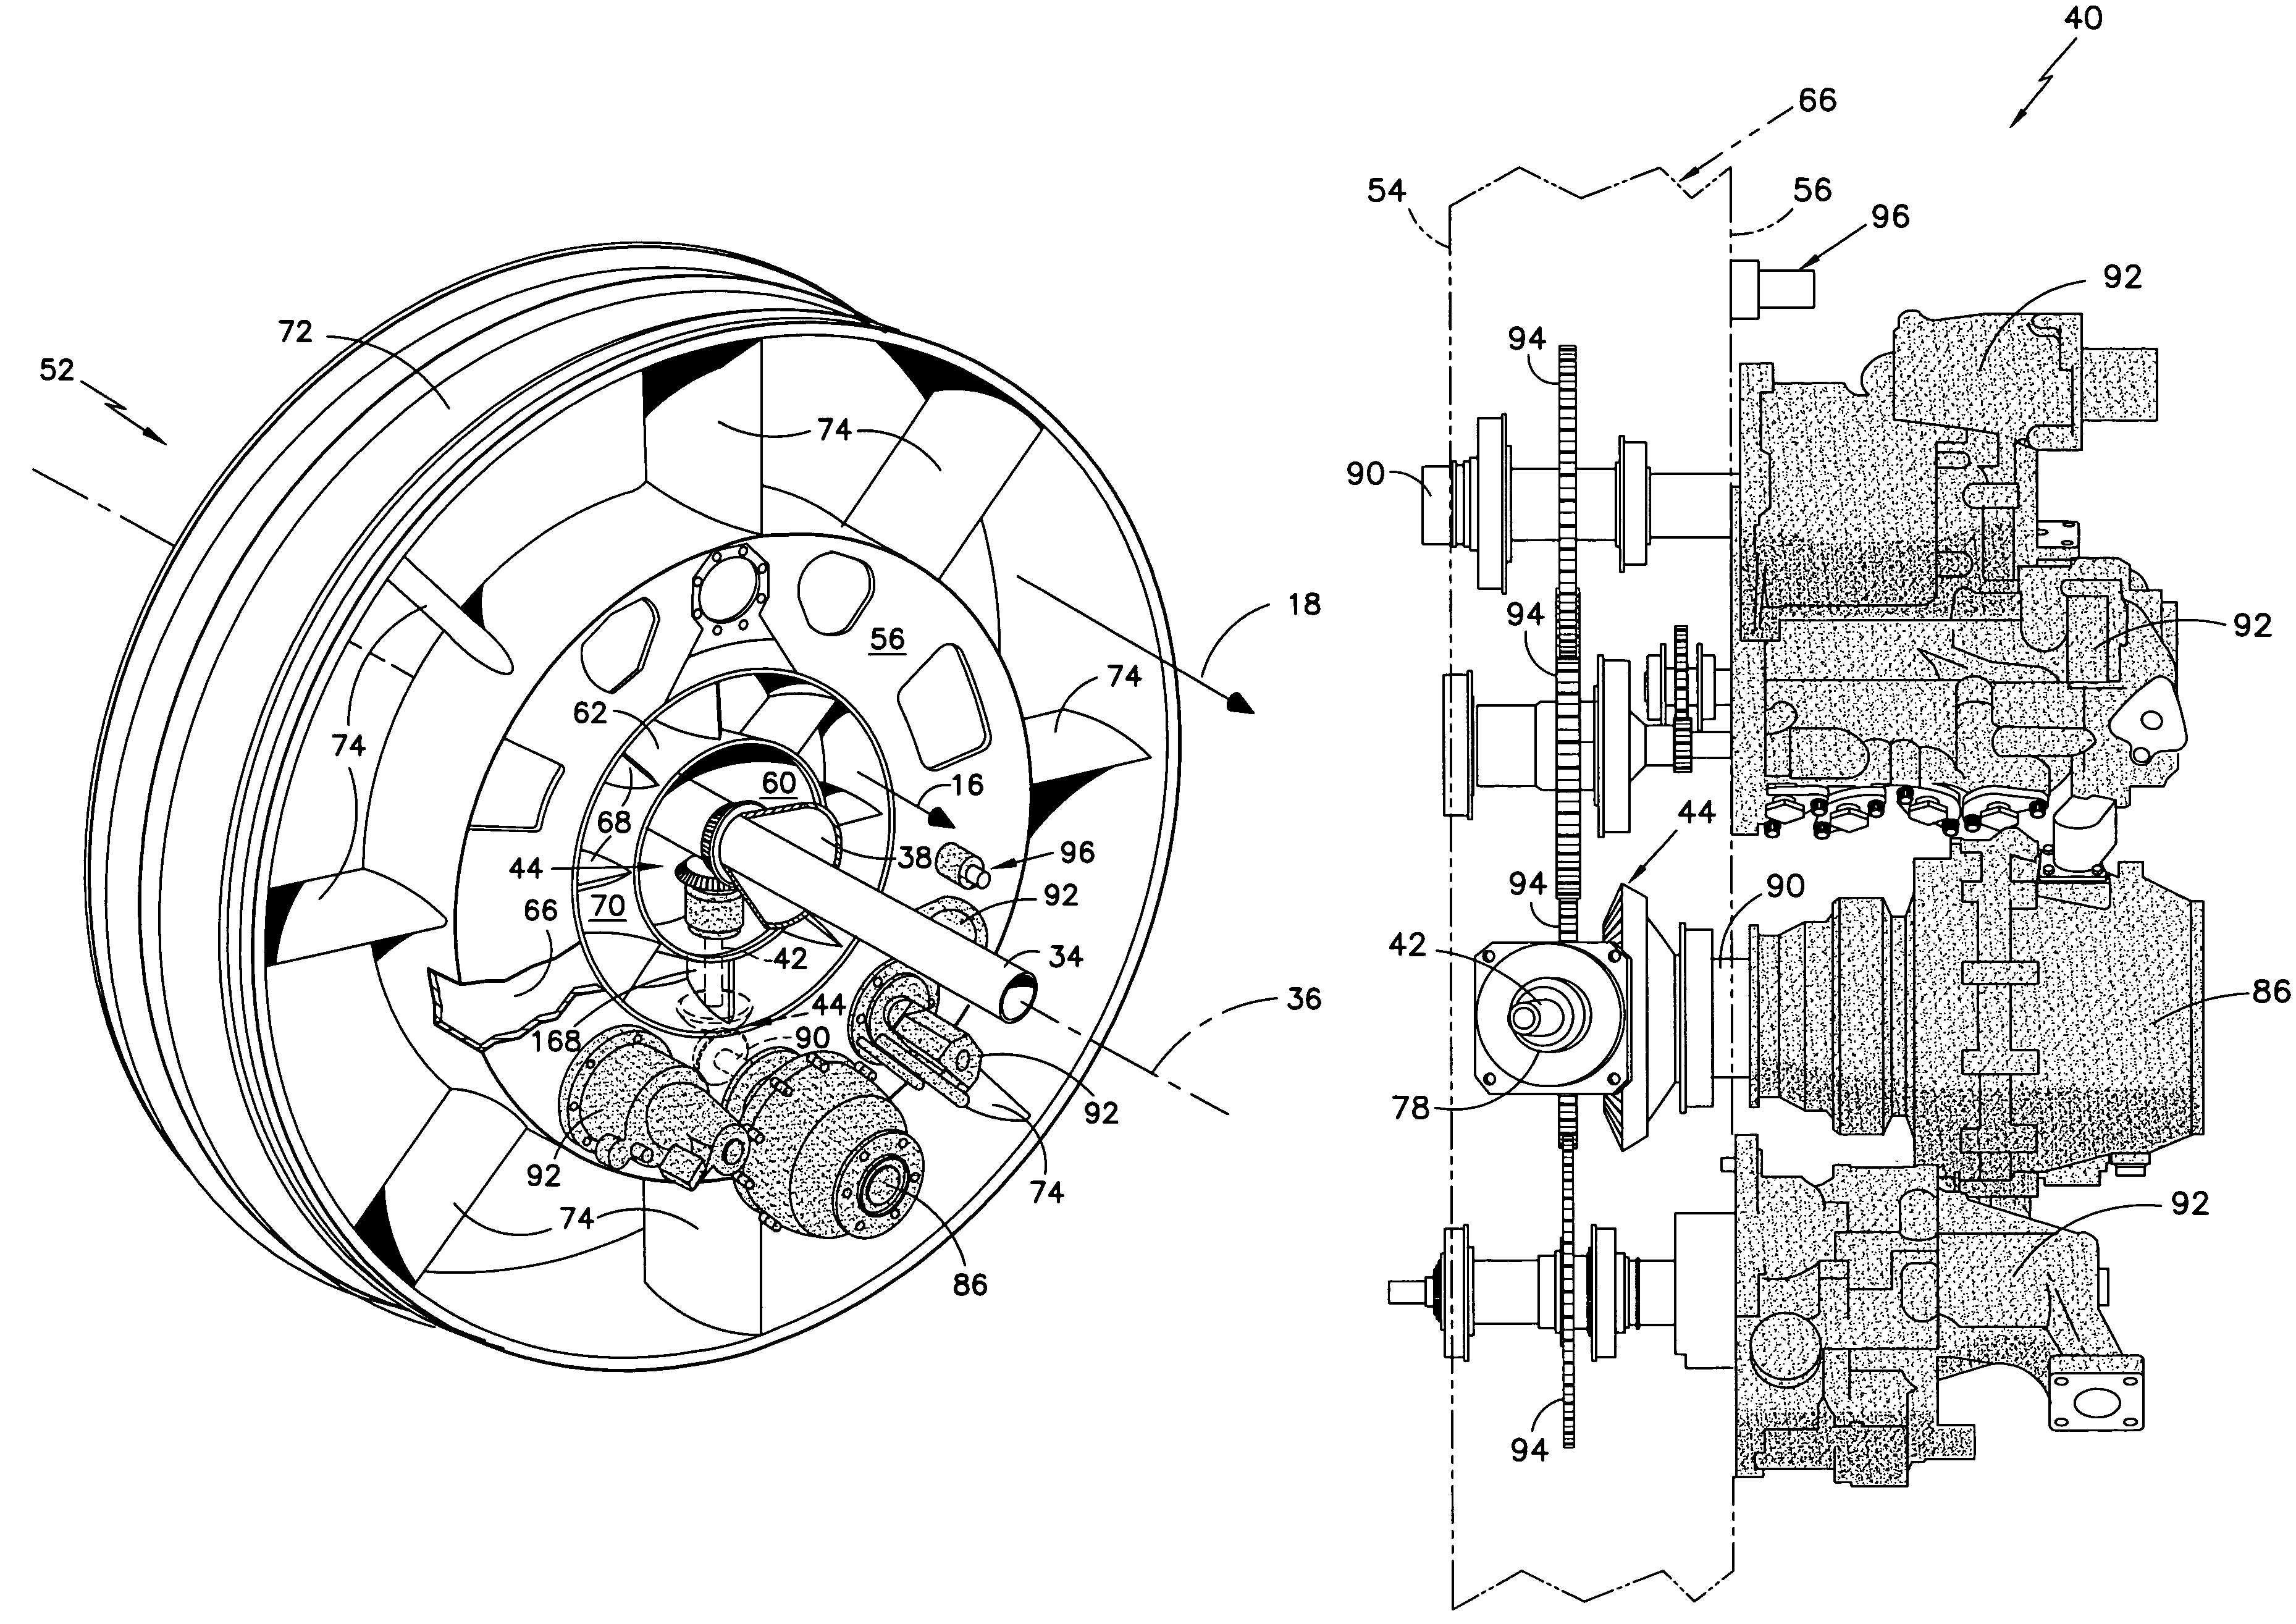 Accessory gearbox